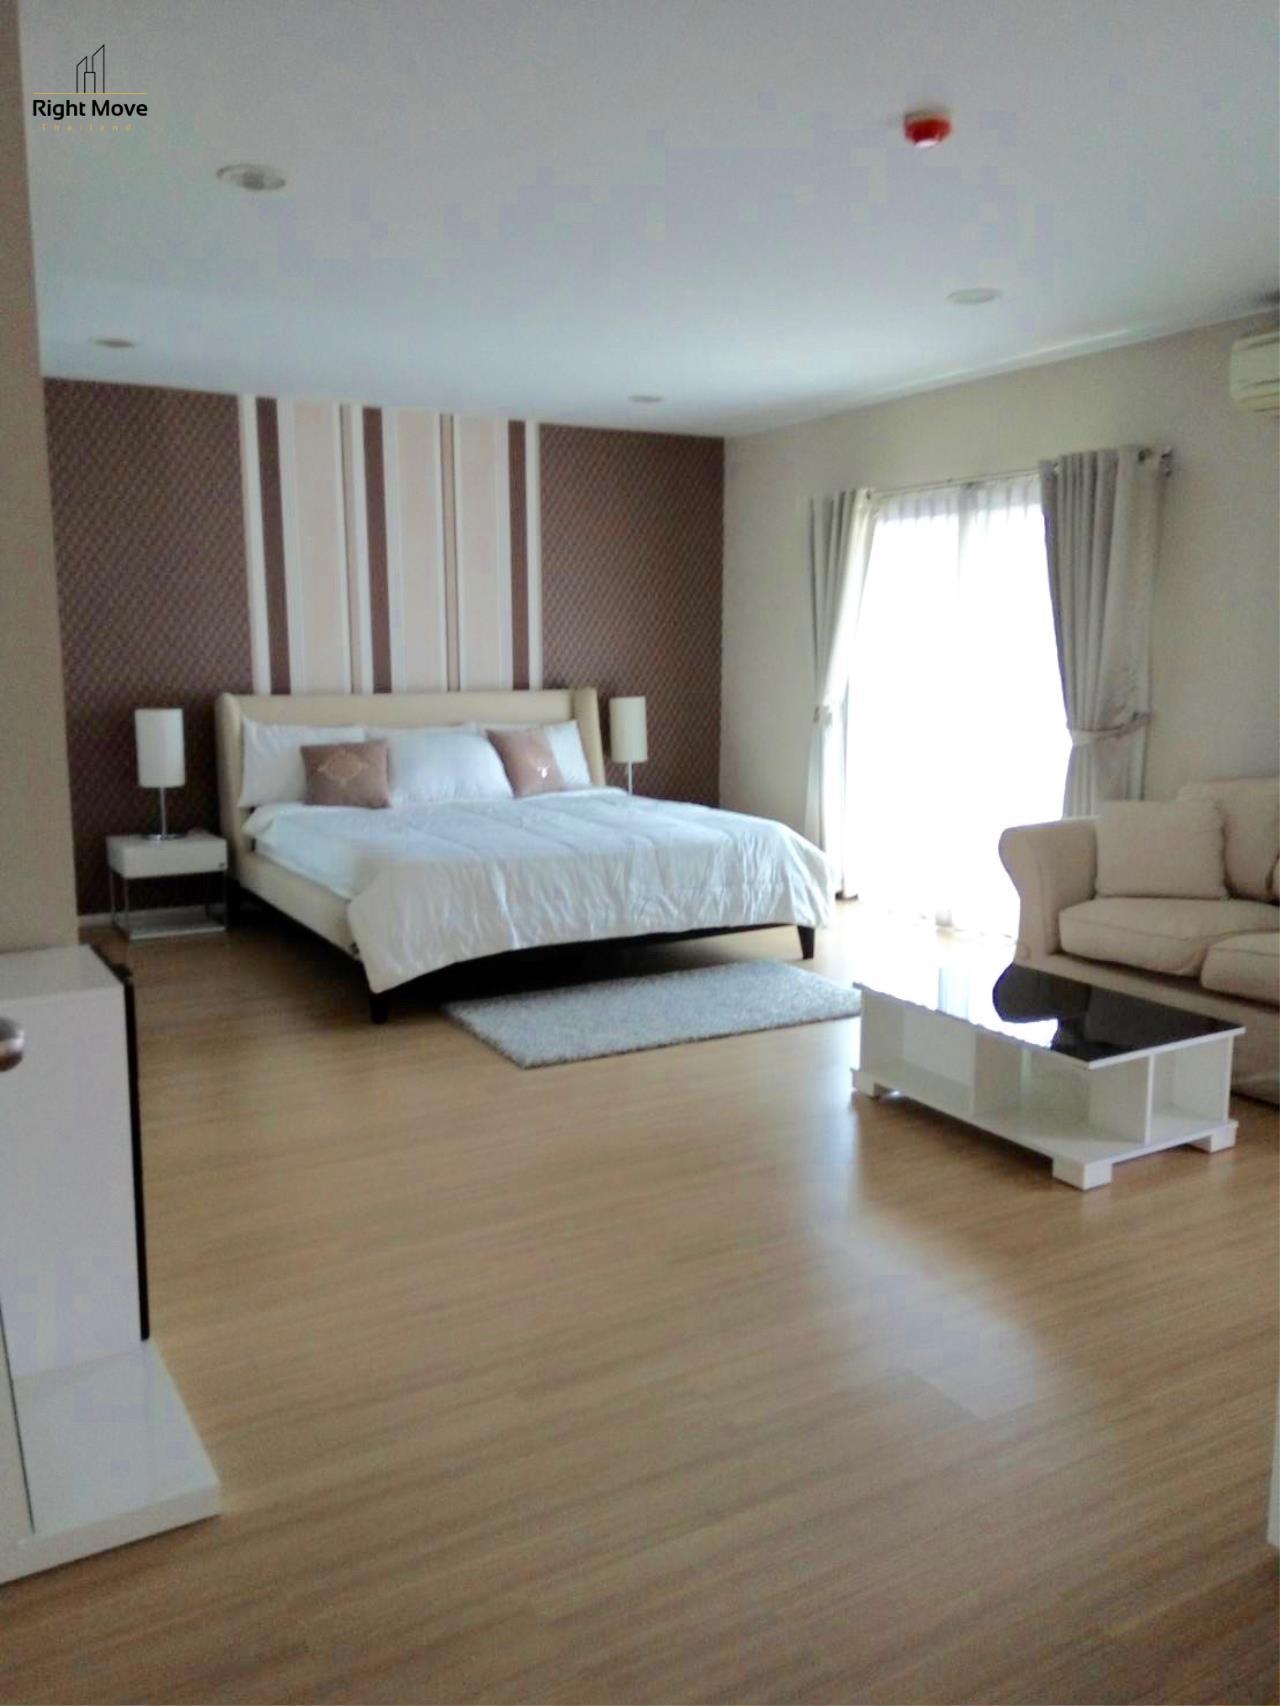 Right Move Thailand Agency's CA6824 Renova Residence Chidlom For Sale 18,000,000 THB 3 Bedrooms 145 Sqm 14